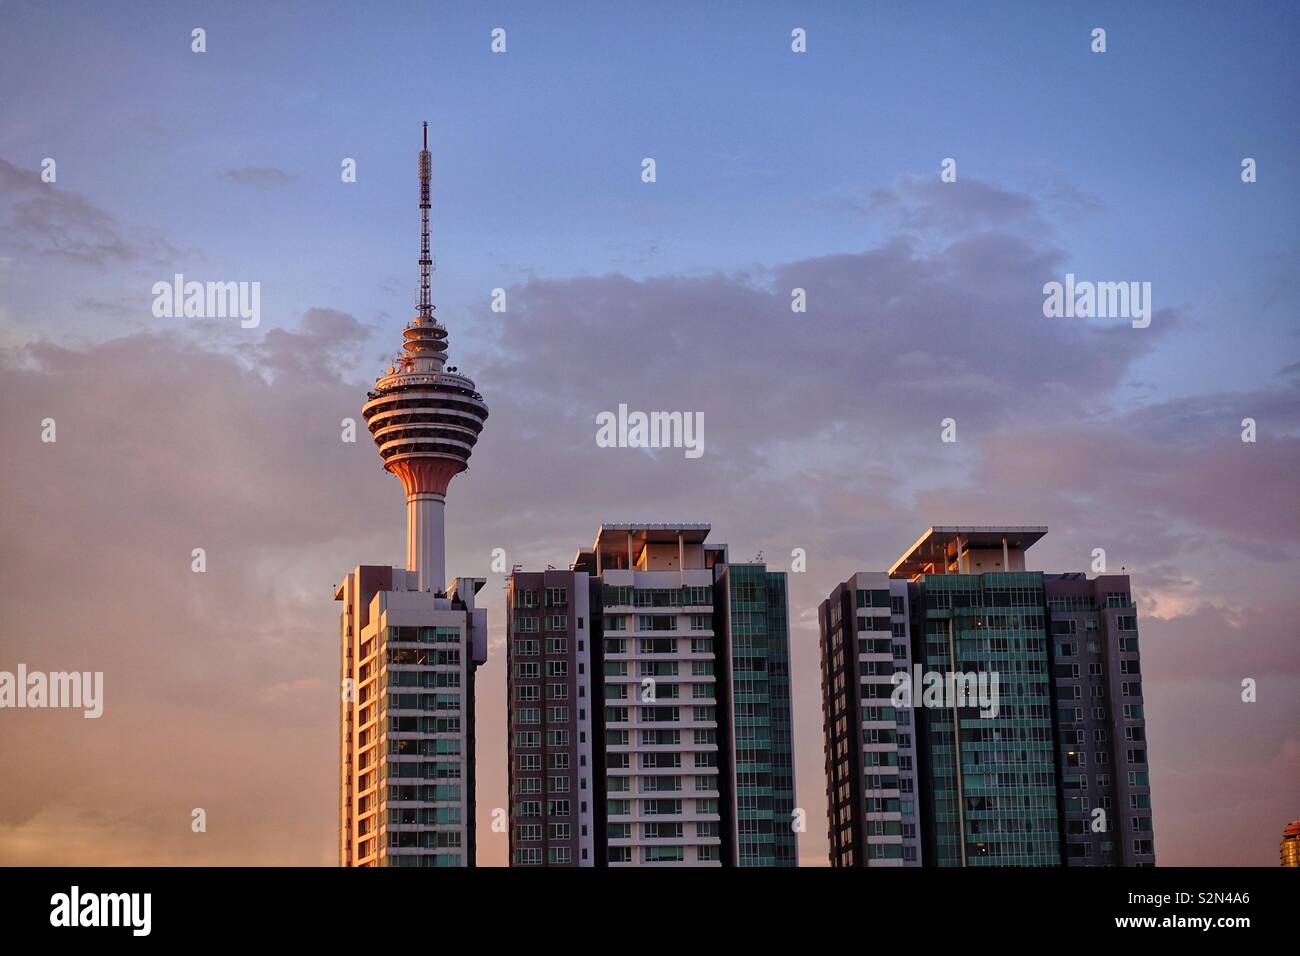 Three houses and a communications tower. In Asia. By sunset. Beautiful colors, calm atmosphere. Stock Photo